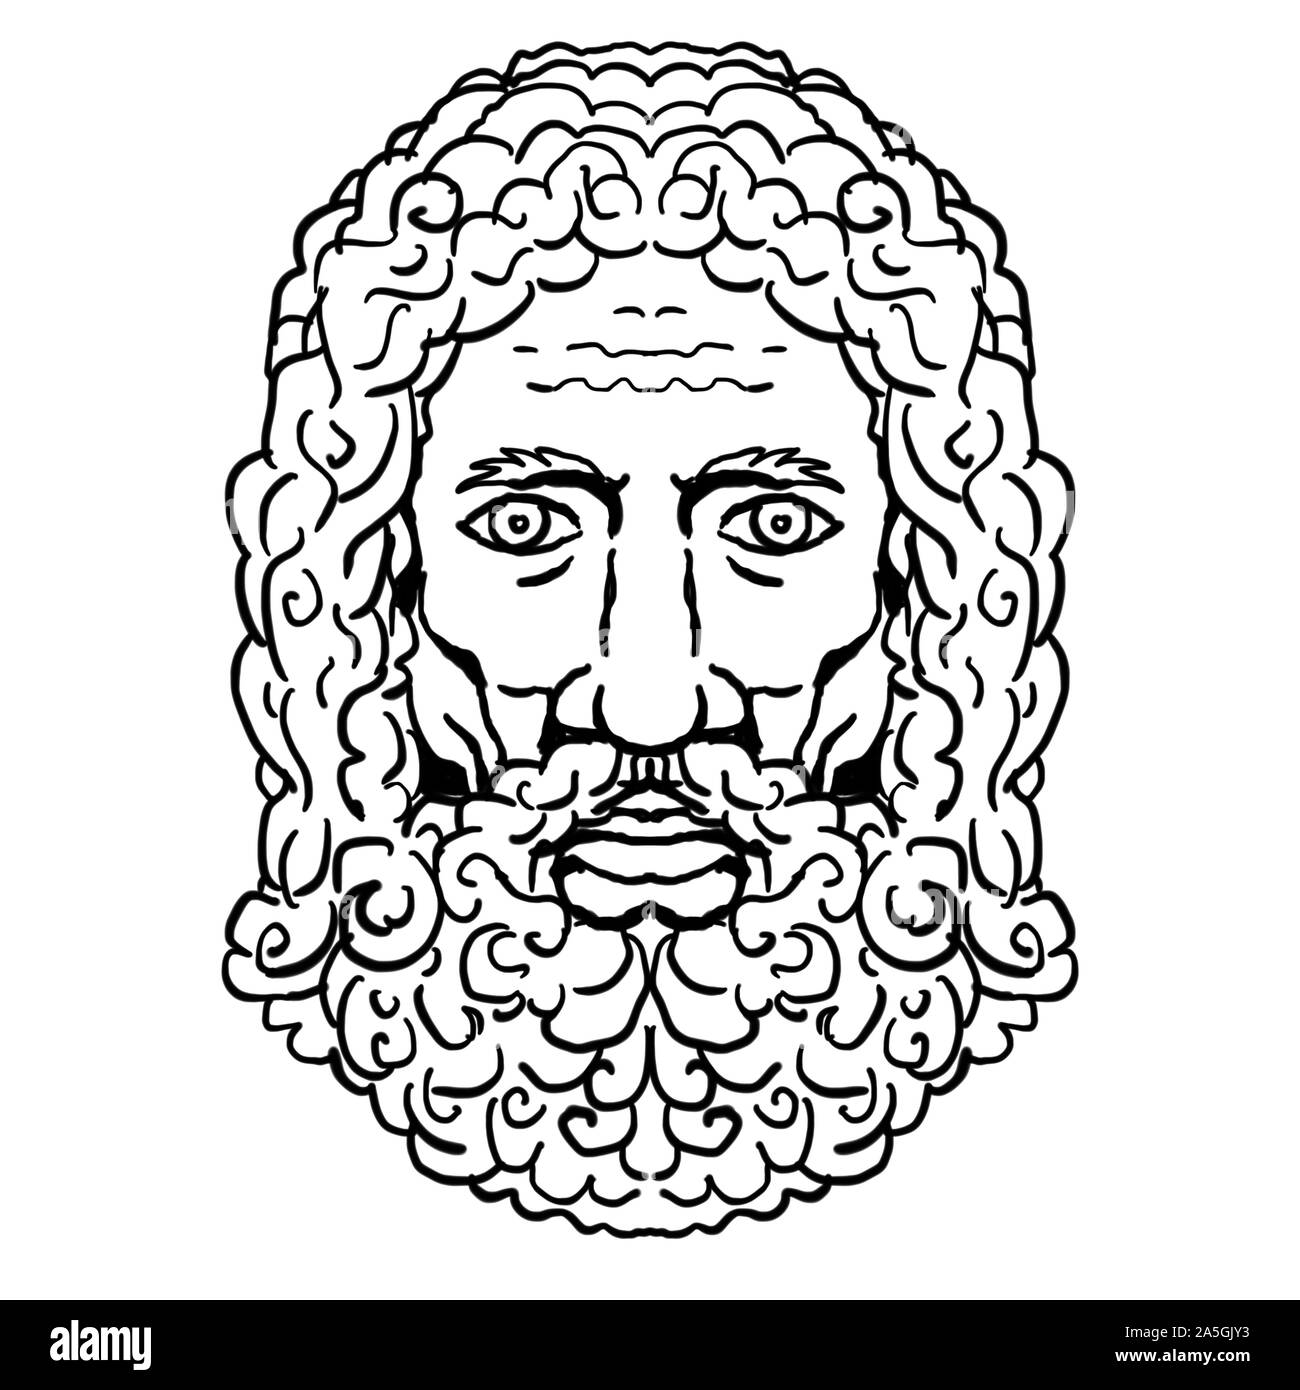 Retro cartoon style portrait drawing of head of Zeus, a Greek god in mythology viewed from front on isolated white background done in black and white Stock Photo